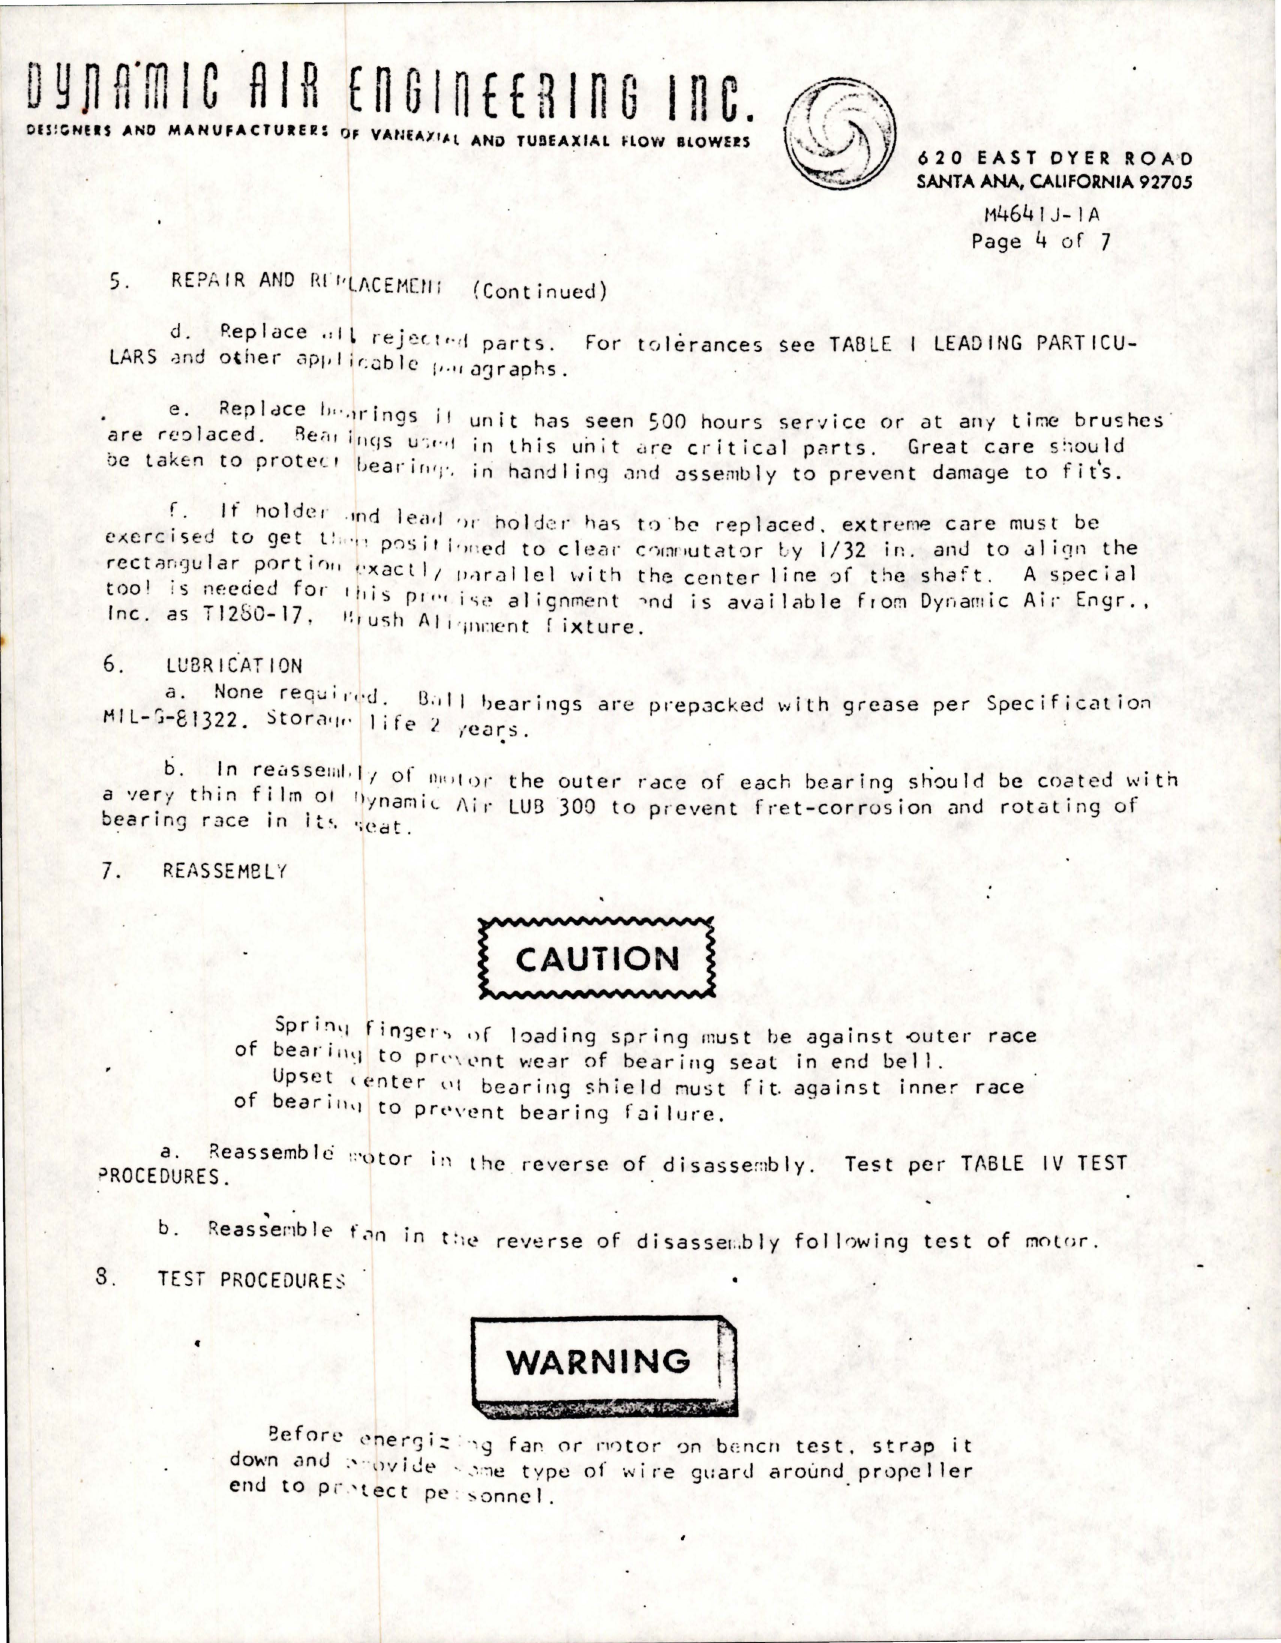 Sample page 7 from AirCorps Library document: Overhaul Instructions for Vaneaxial Fan - Part M4641 J-1A 